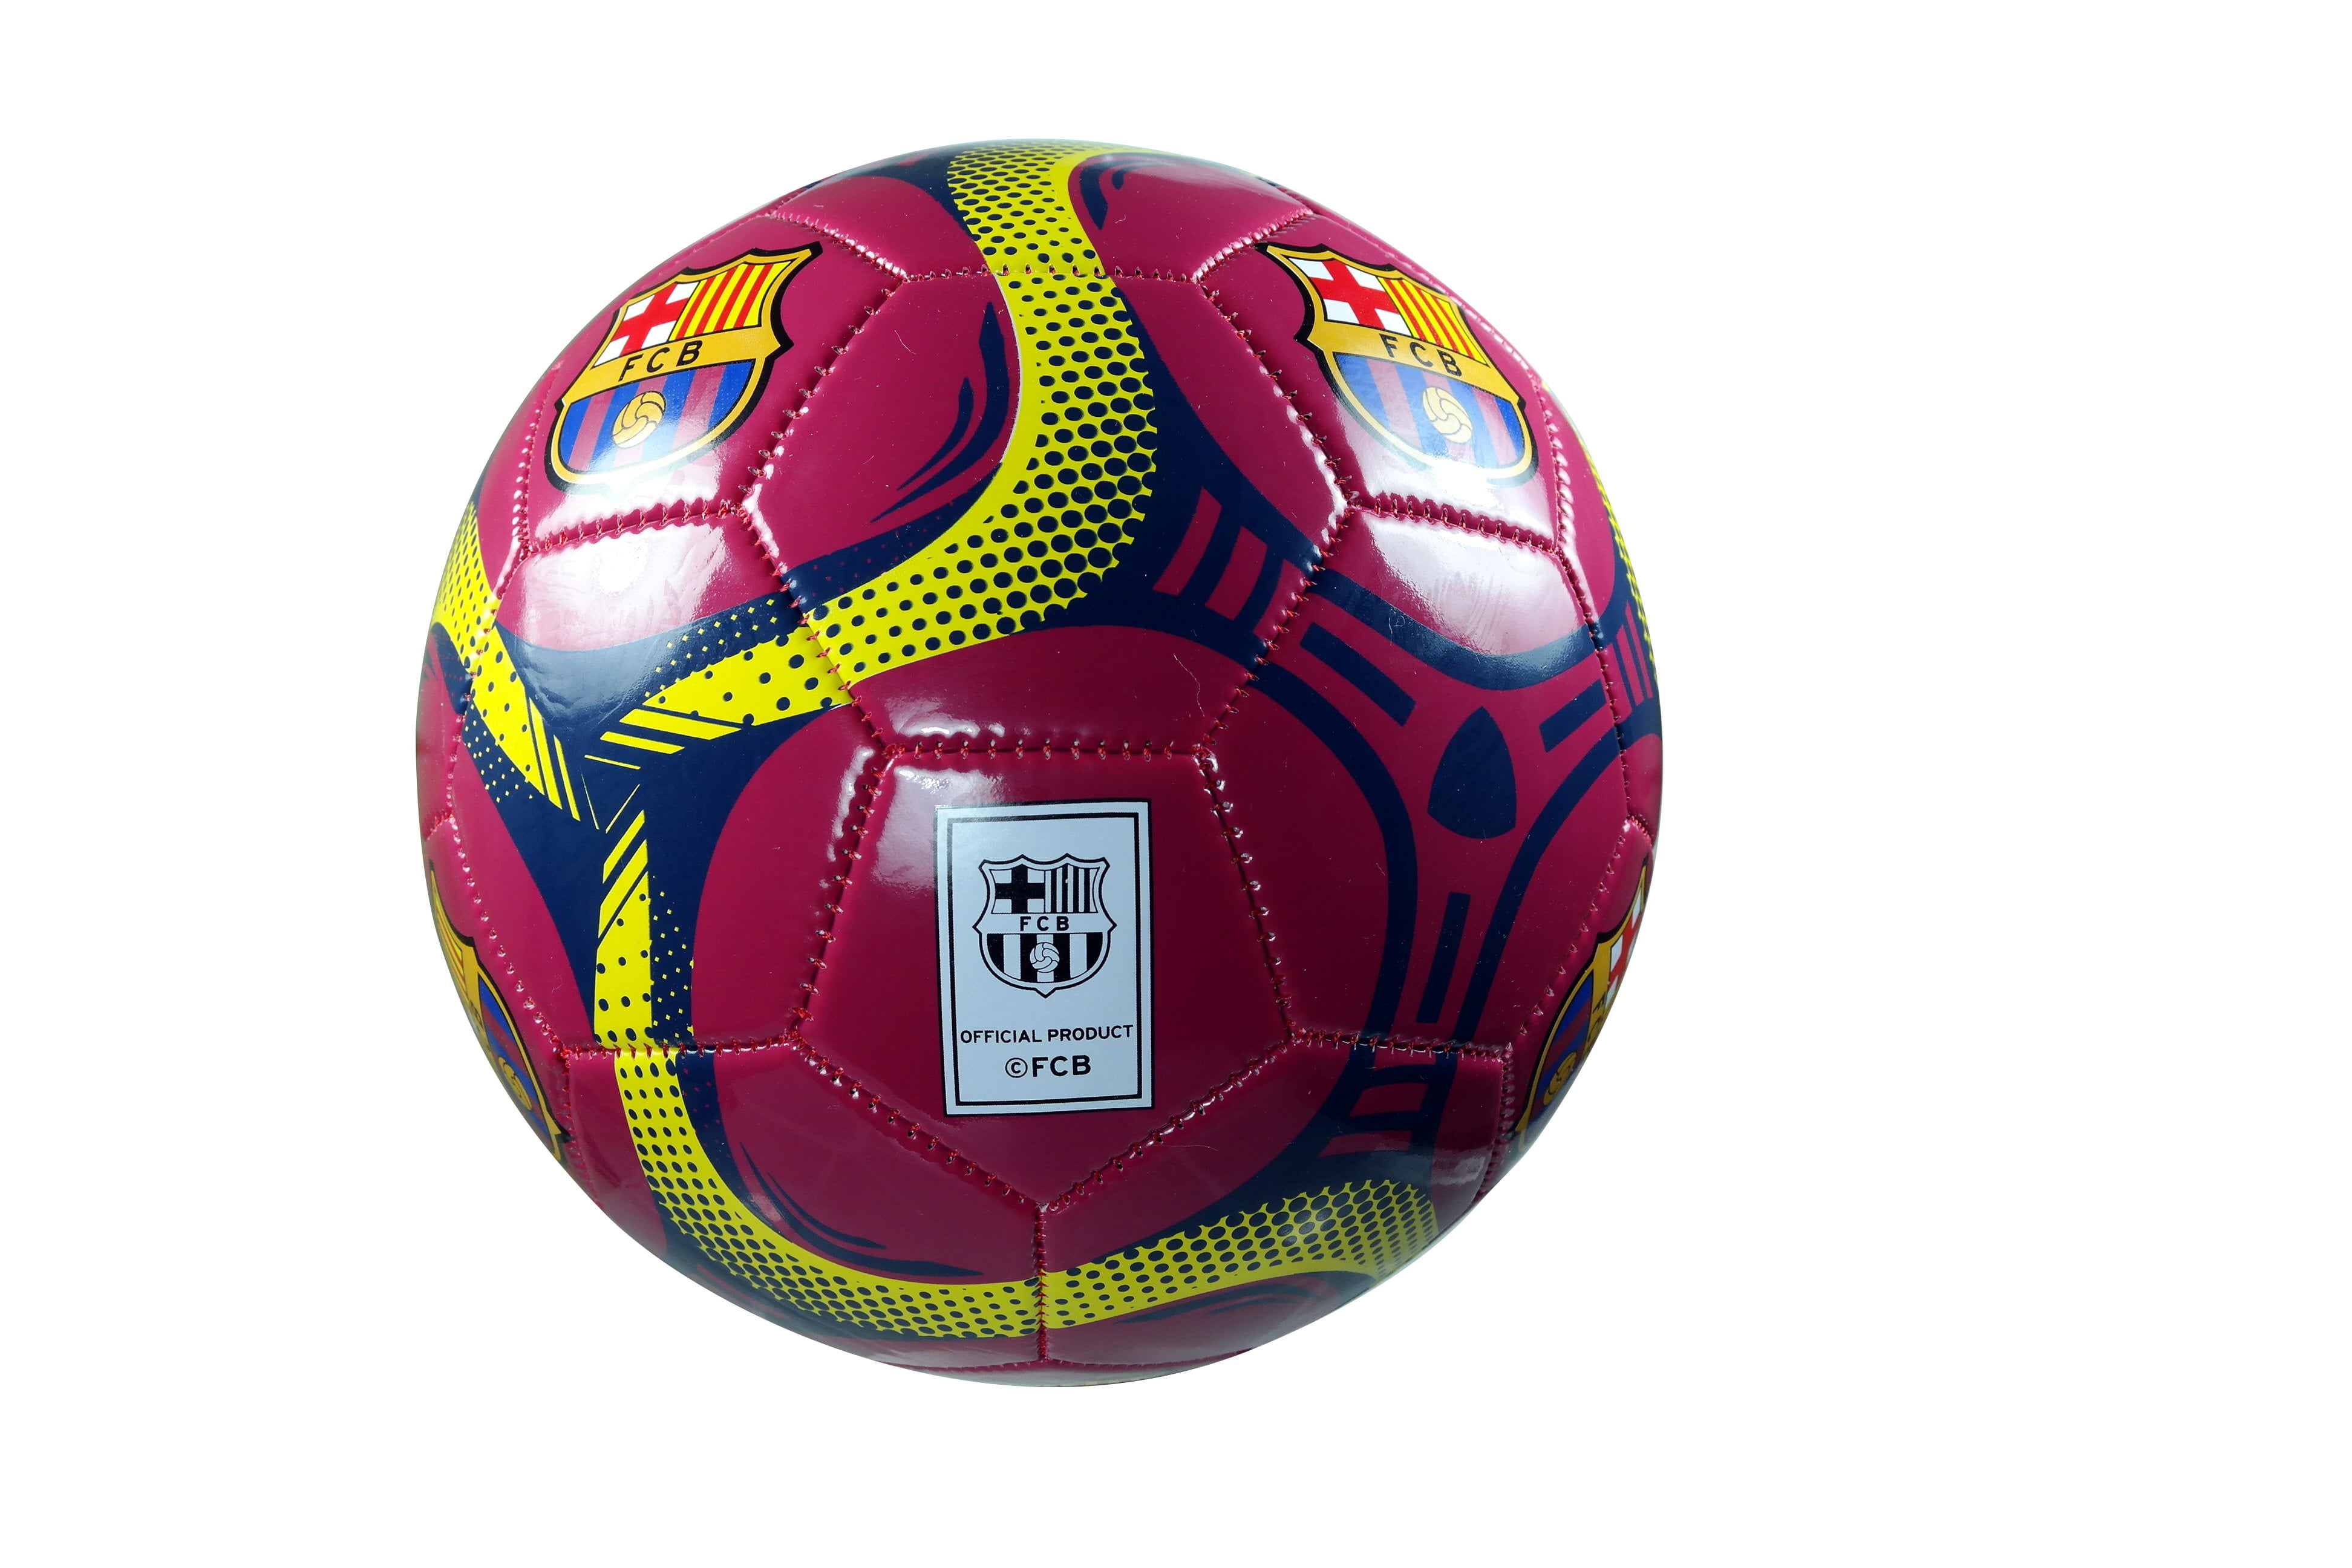 FC Barcelona Authentic Official Licensed Soccer Ball Size 5-06-5 